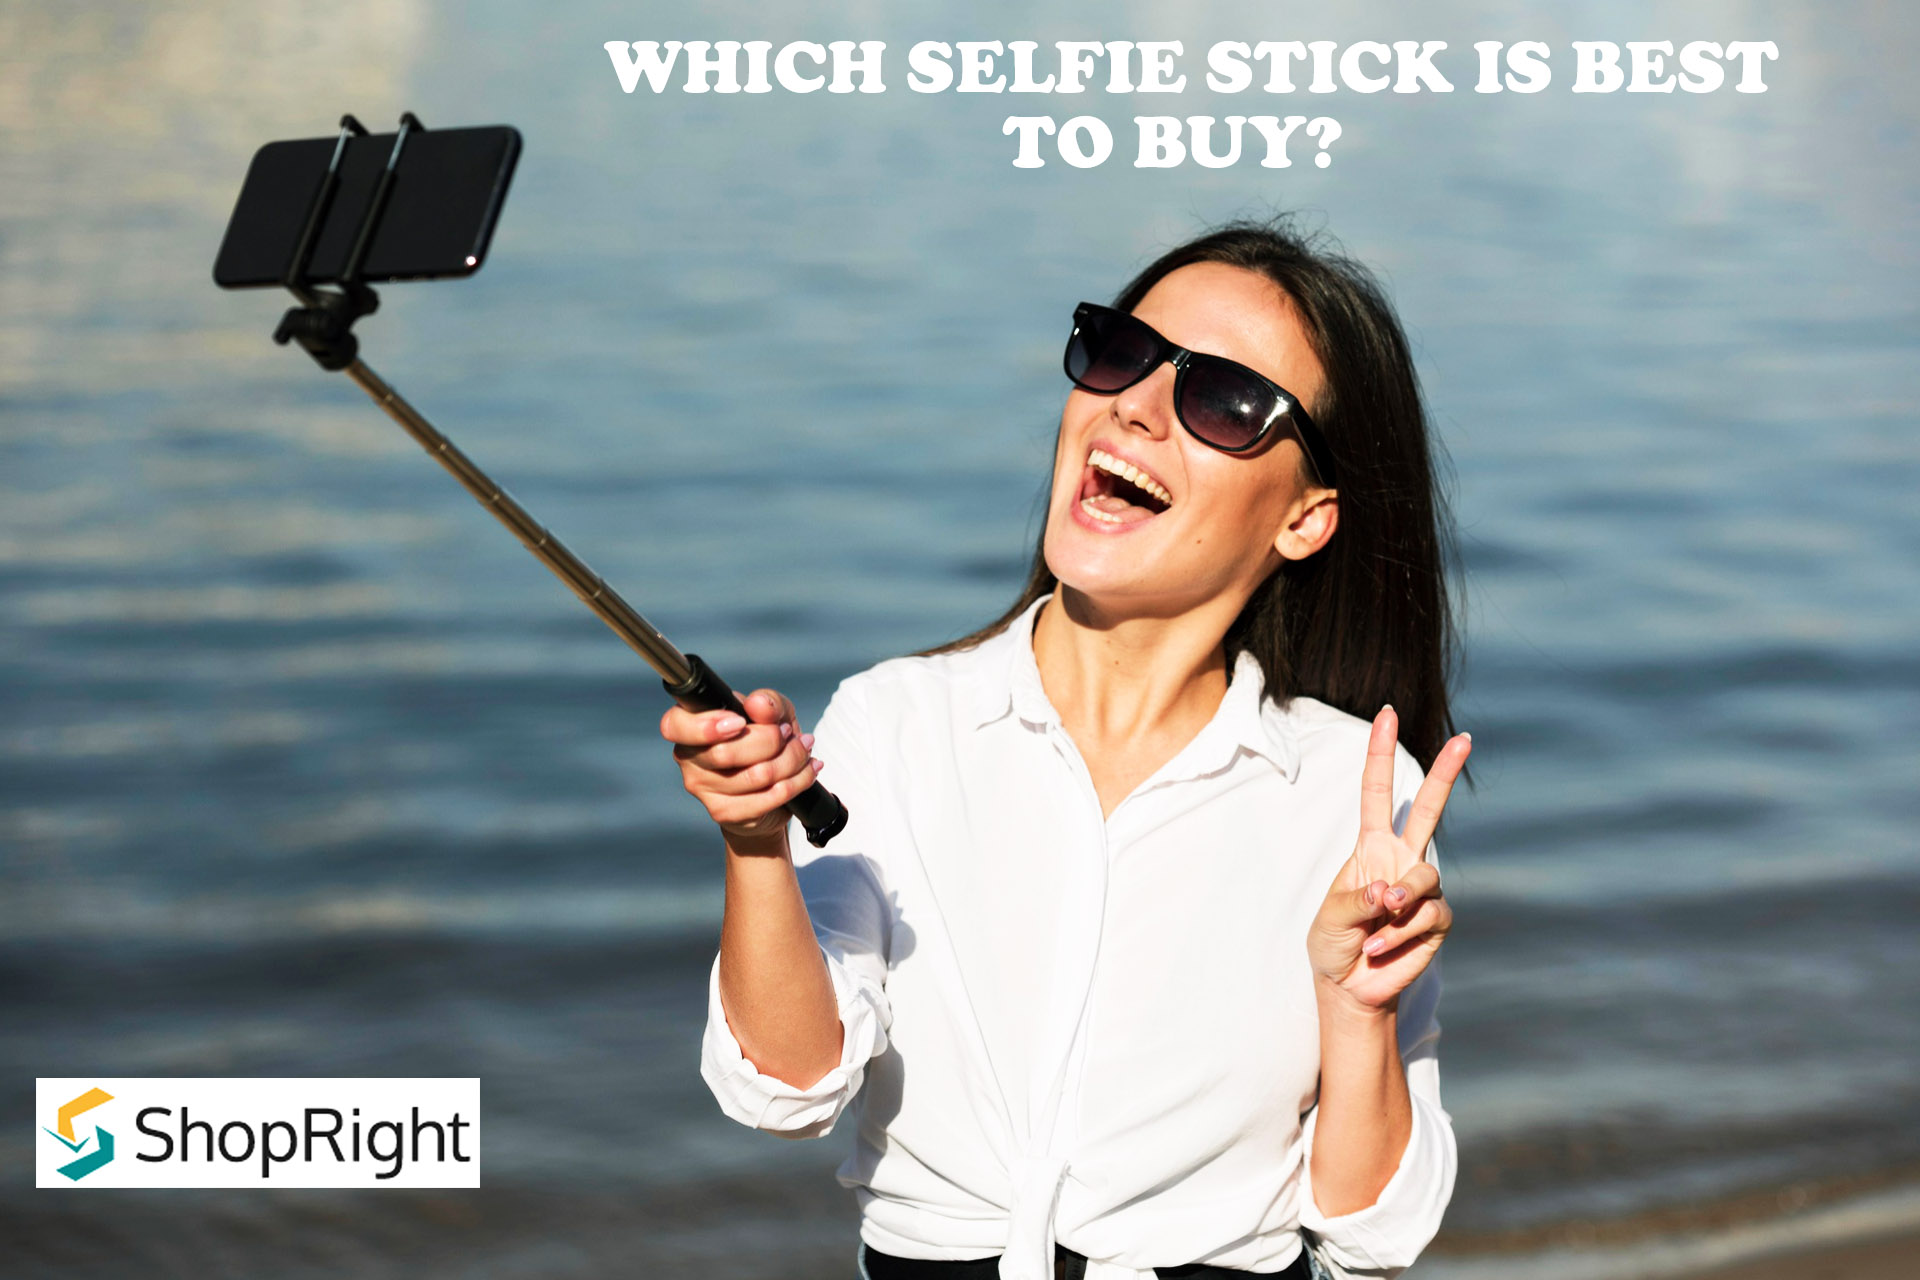 Which Selfie Stick Is Best To Buy?